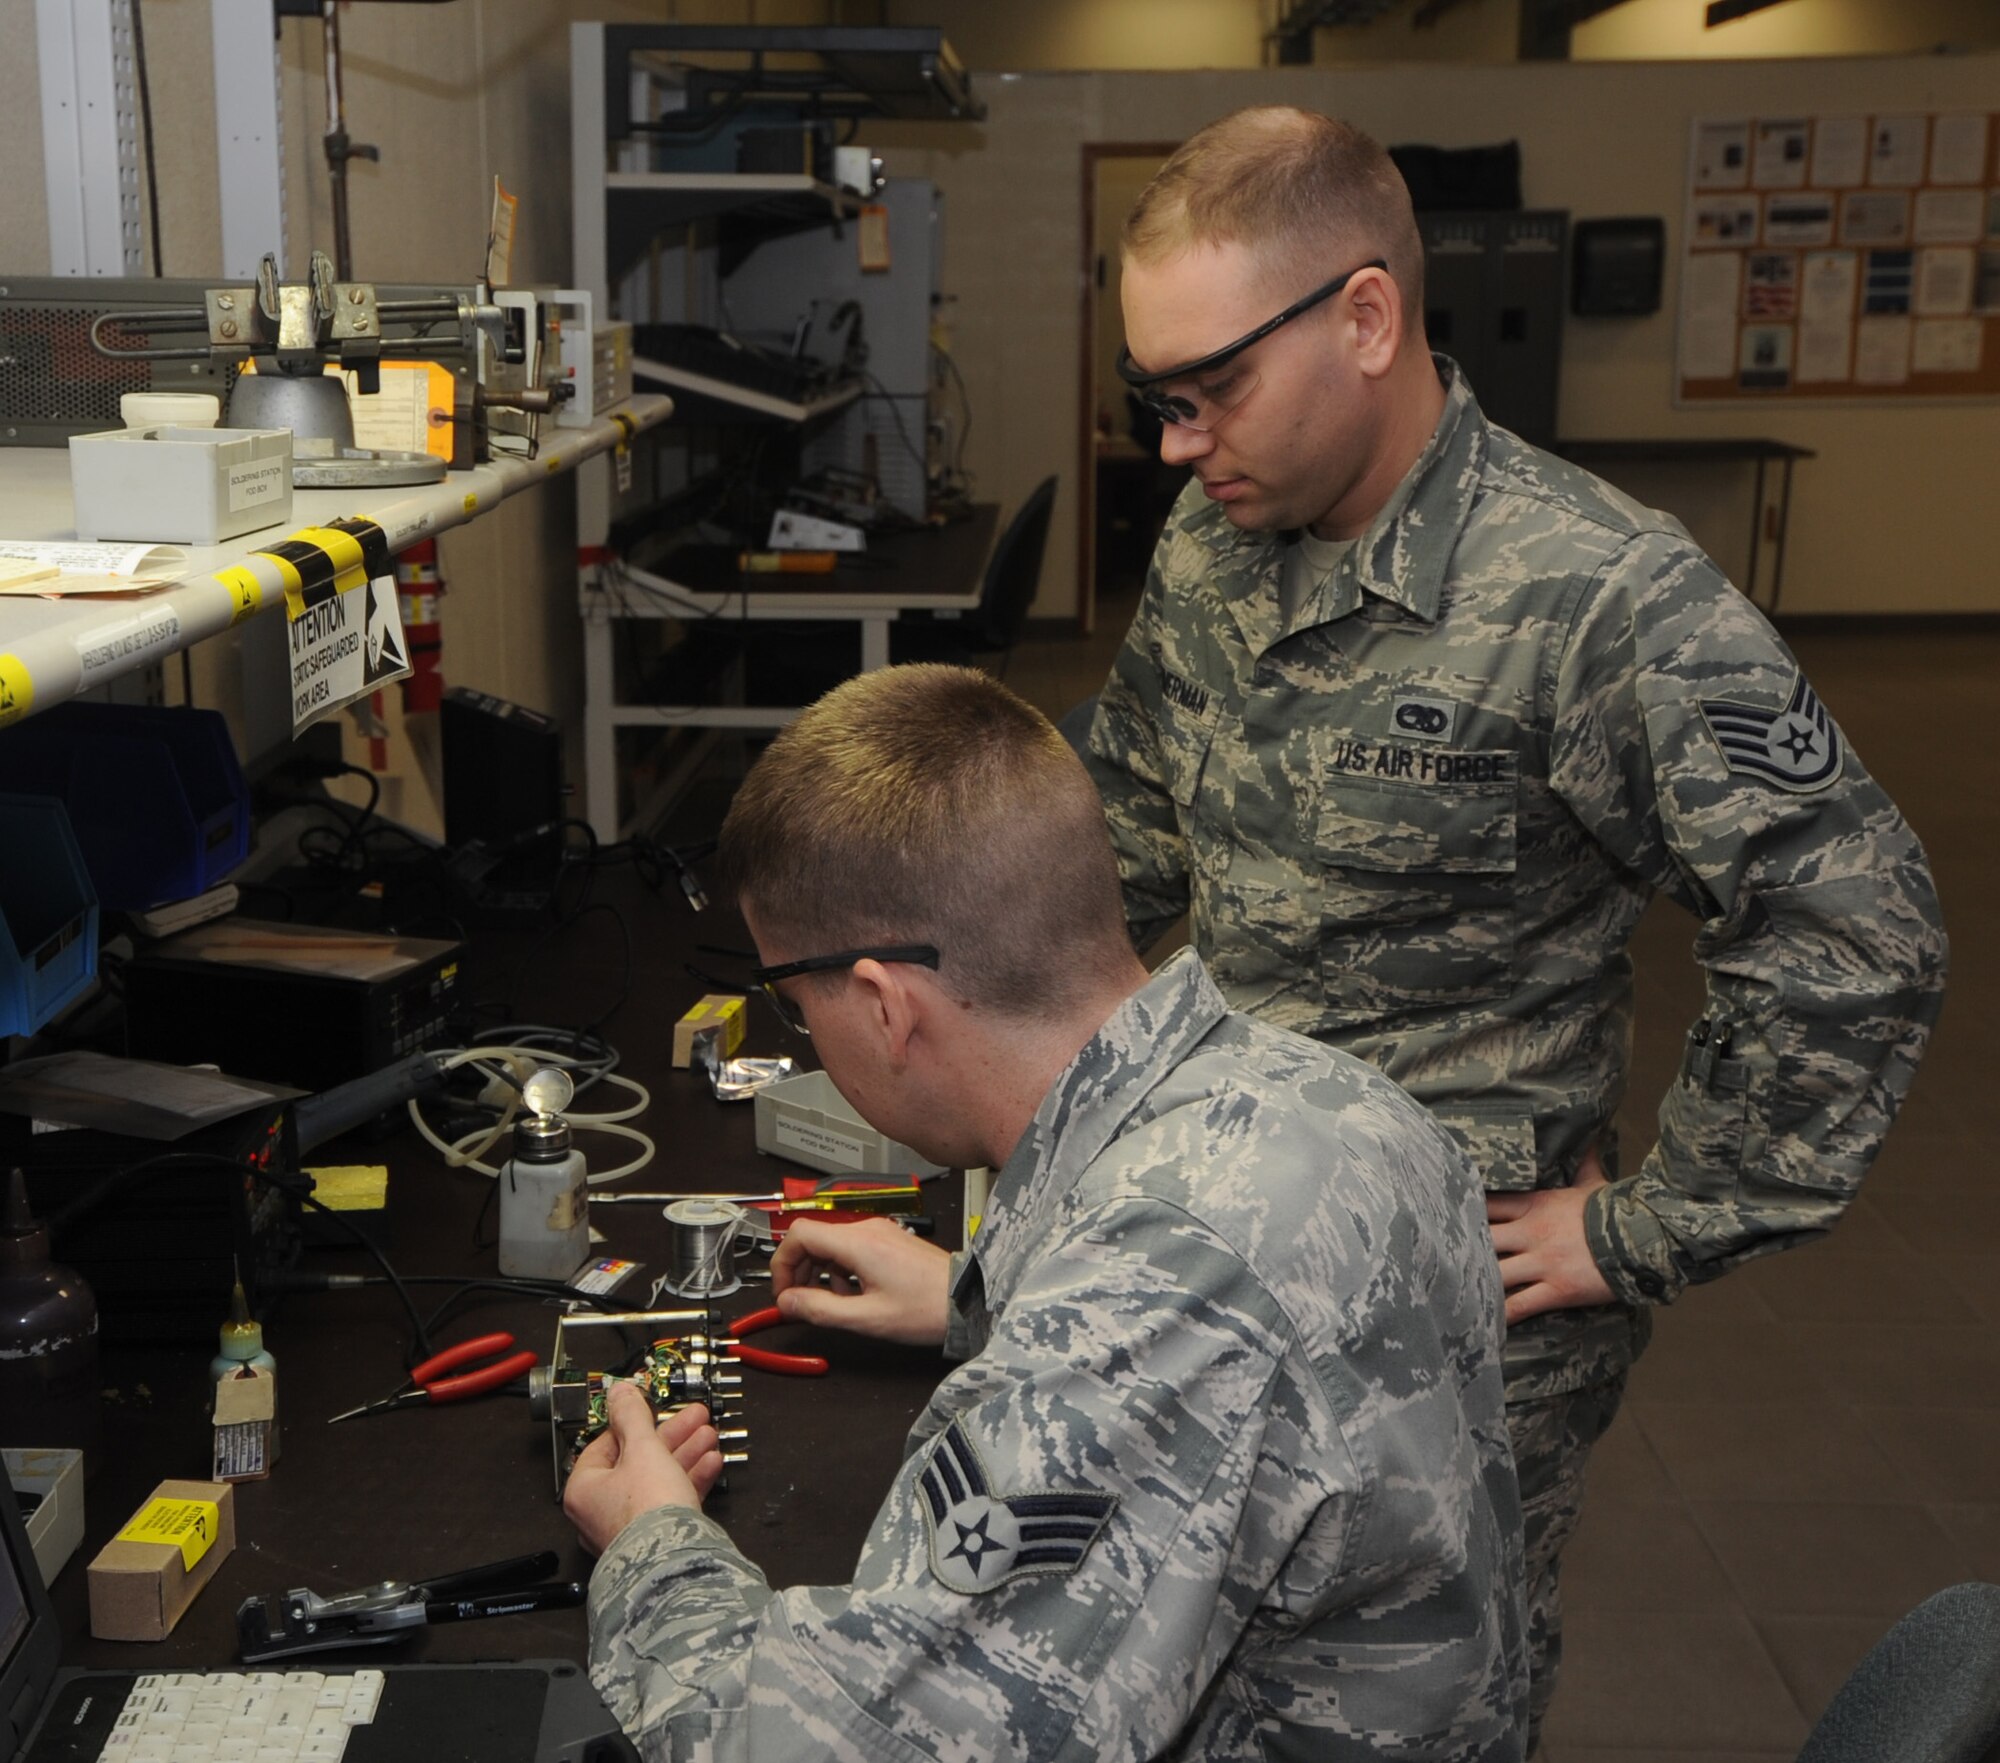 Senior Airman Kevin Burns and Staff Sgt. Eric Zimmerman, 56th Component Maintenance Squadron Avionics Flight team leaders, work on removing a communication switch from an audio panel at the avionics flight. (U.S. Air Force photo by Staff Sgt. Luther Mitchell)